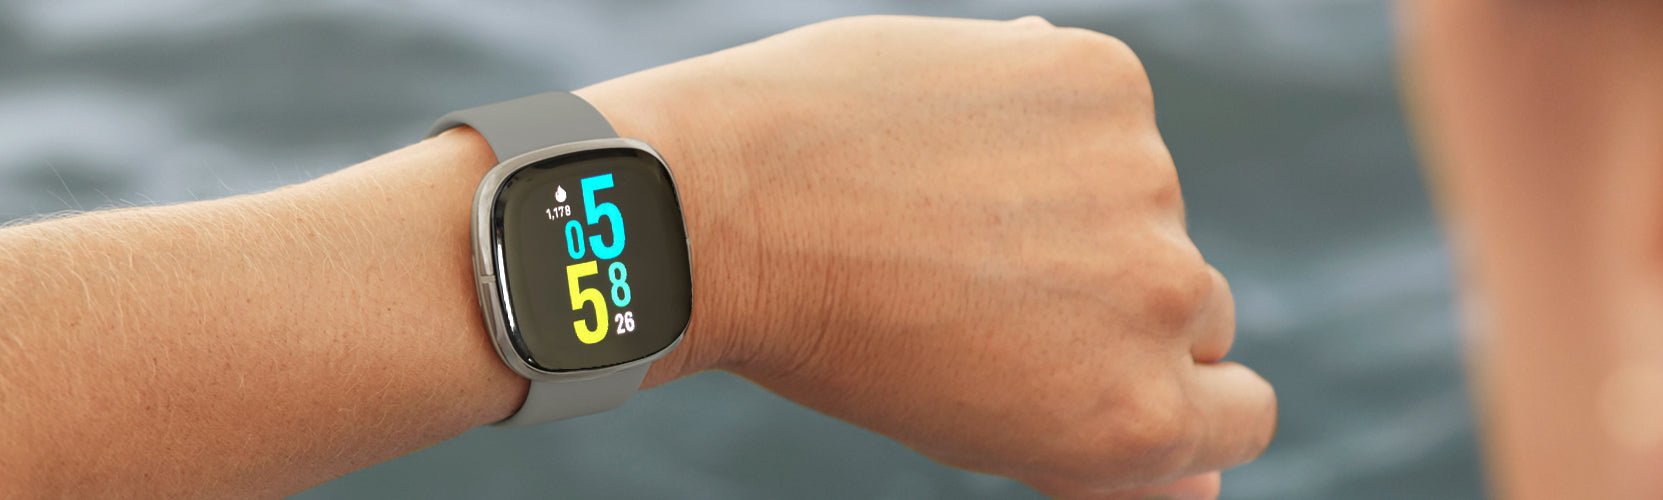 Take On the World in Style with Wasserstein Screen Protector for Fitbit